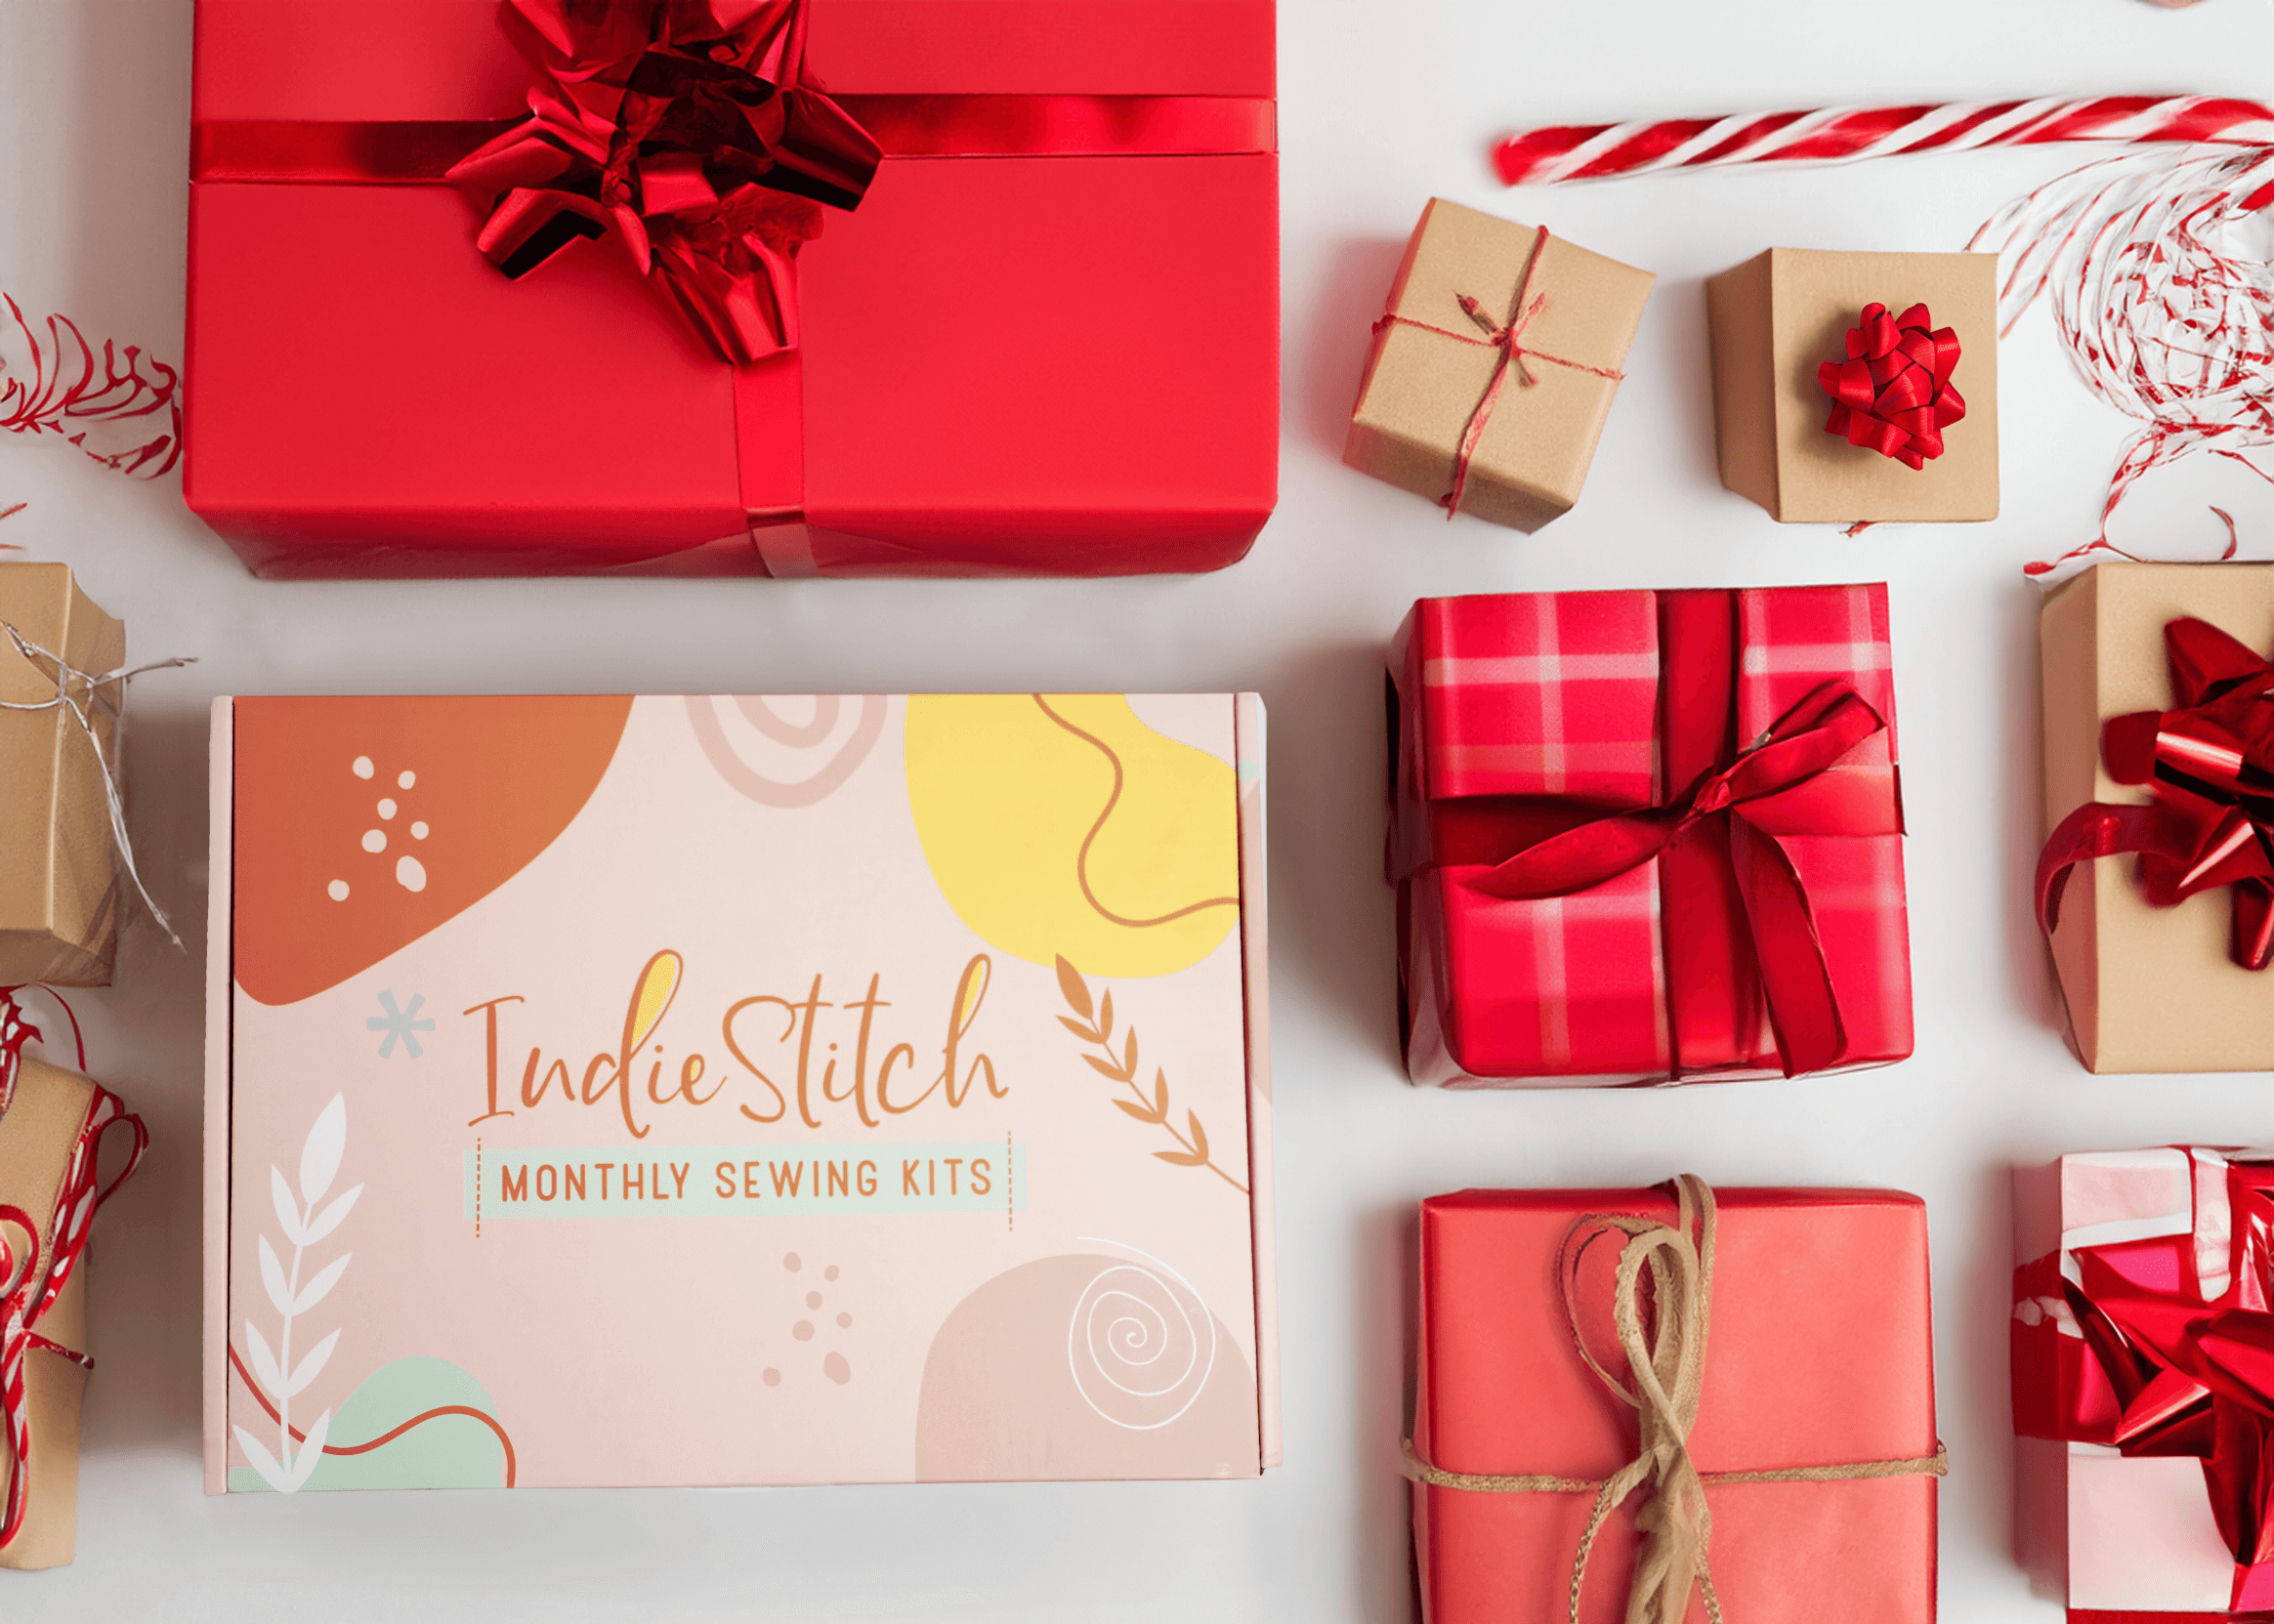 IndieStitch box surrounded by wrapped gifts